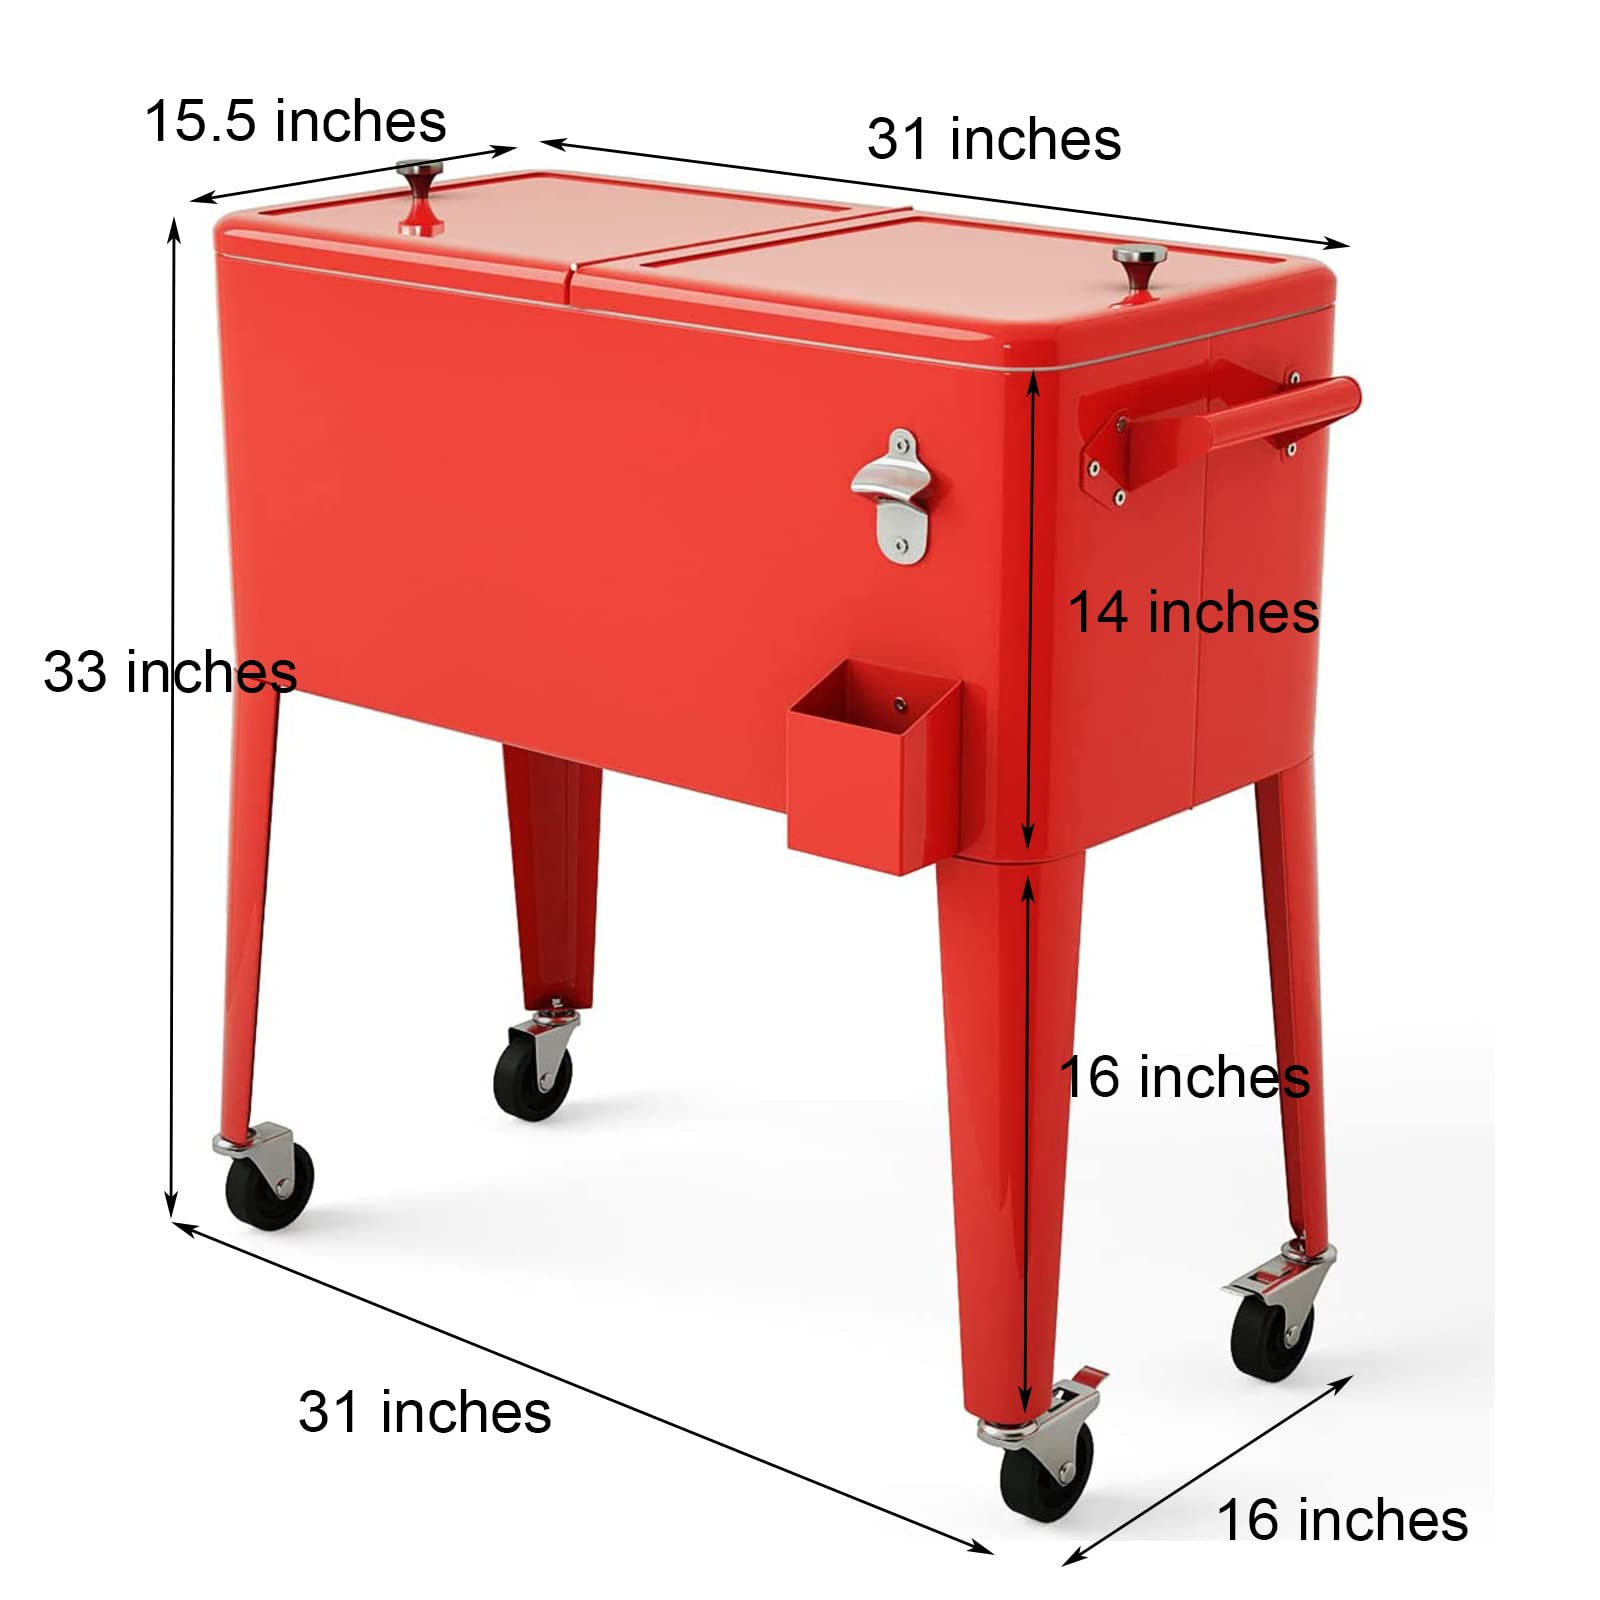 80 Quart Cooler Cart Outdoor Cooler Cart ,Portable Cooler with Casters,Red Metal